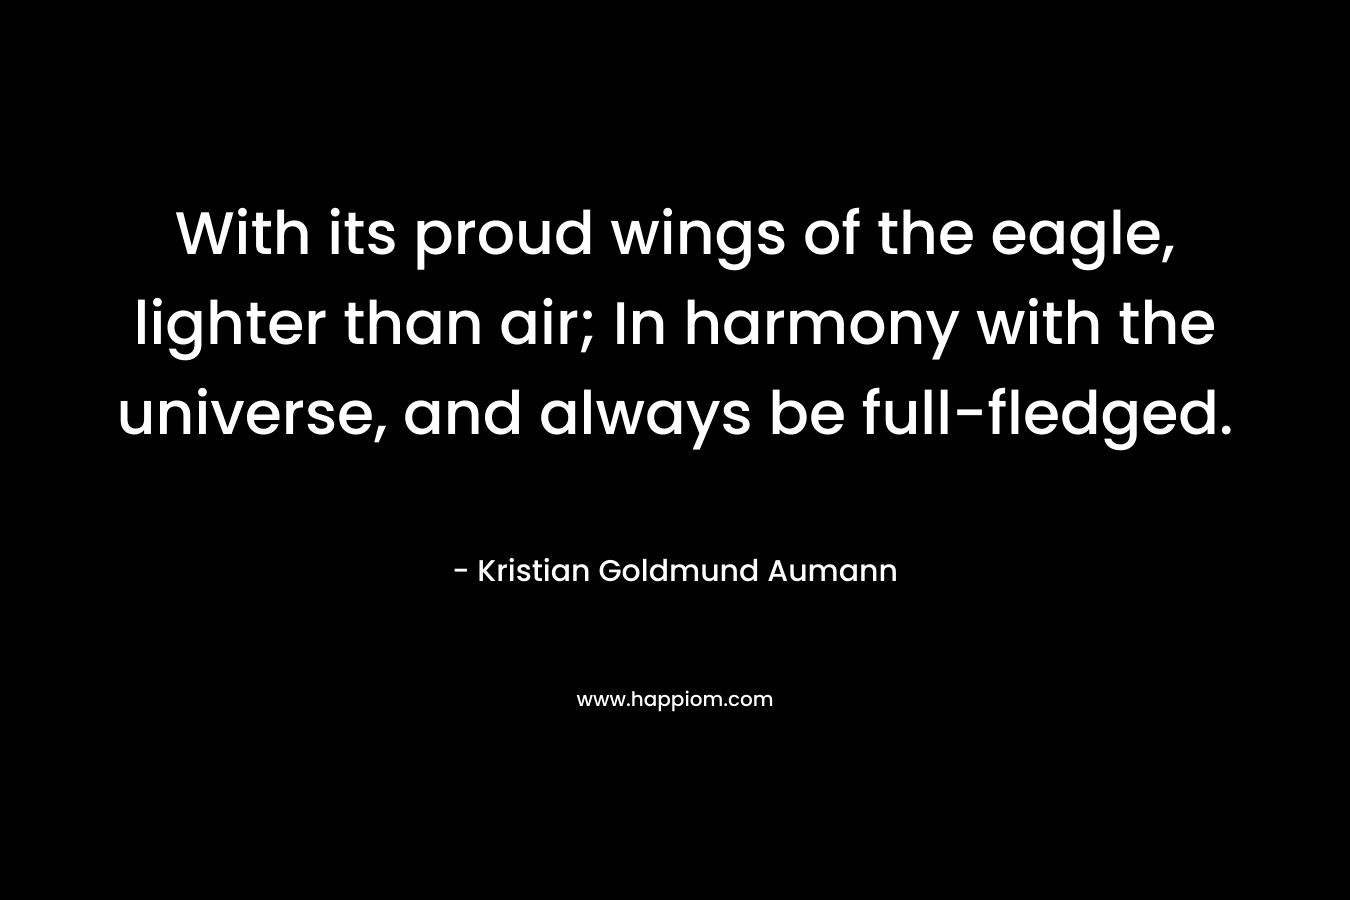 With its proud wings of the eagle, lighter than air; In harmony with the universe, and always be full-fledged.